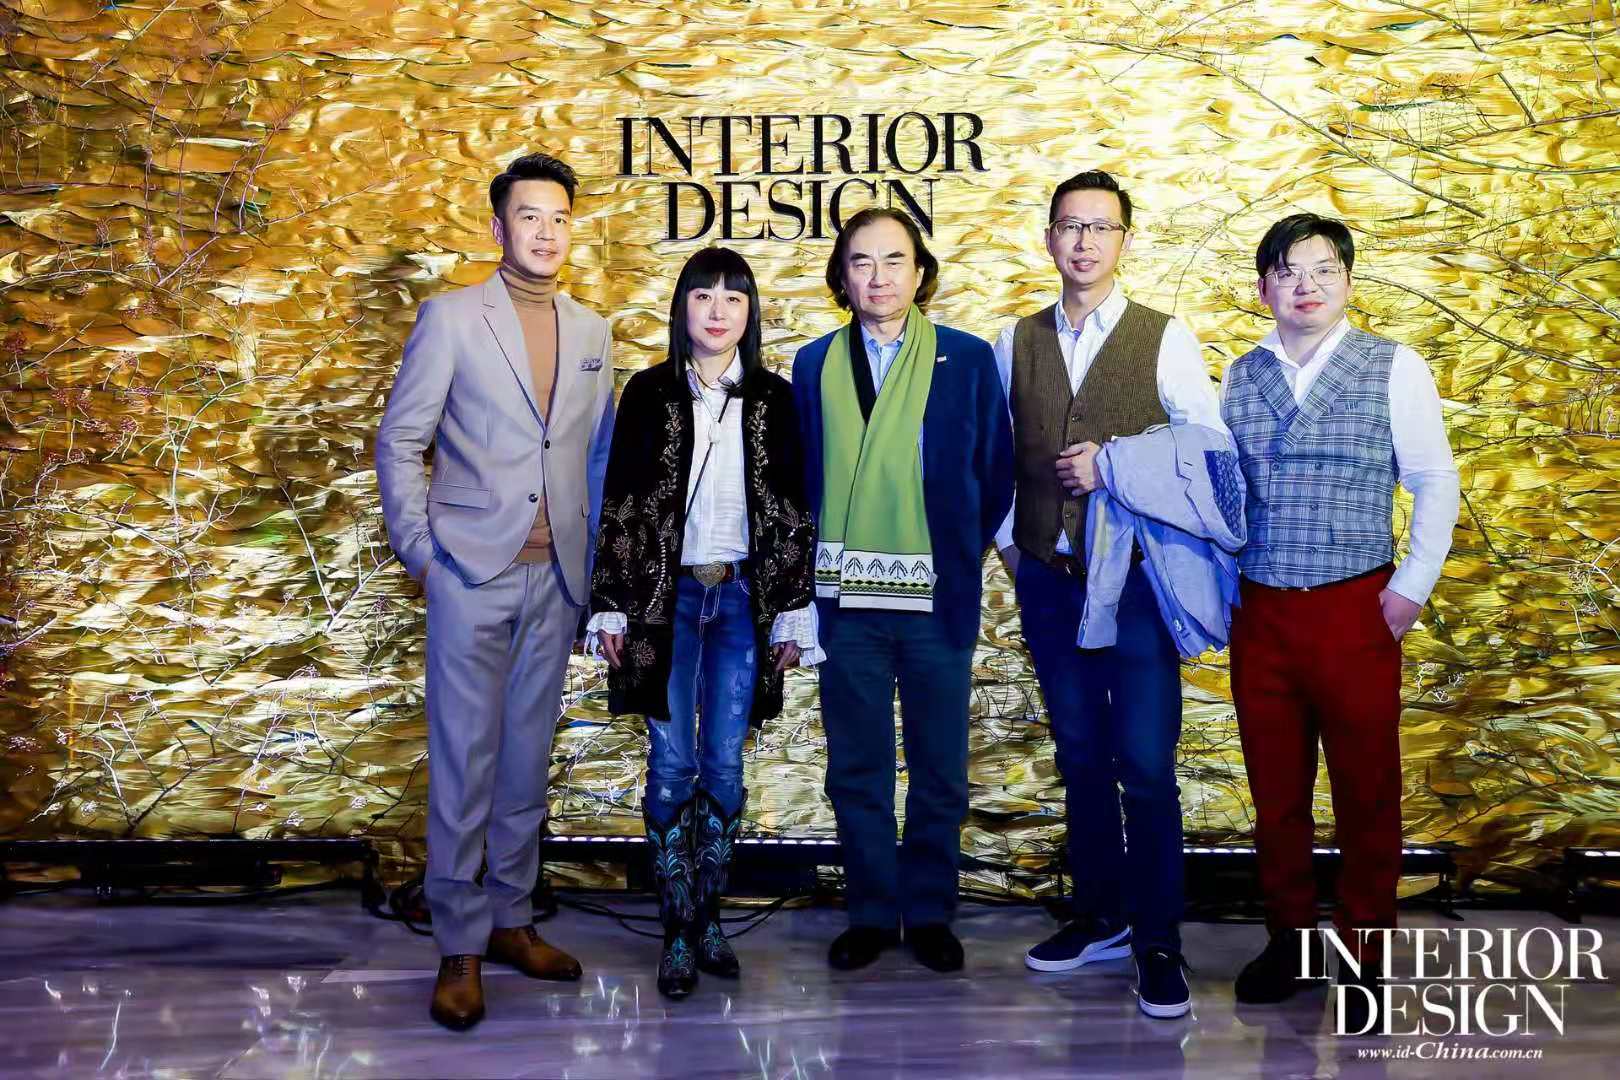 Mr. Lei Yuming participated in the 14th Hall of fame China interior design 